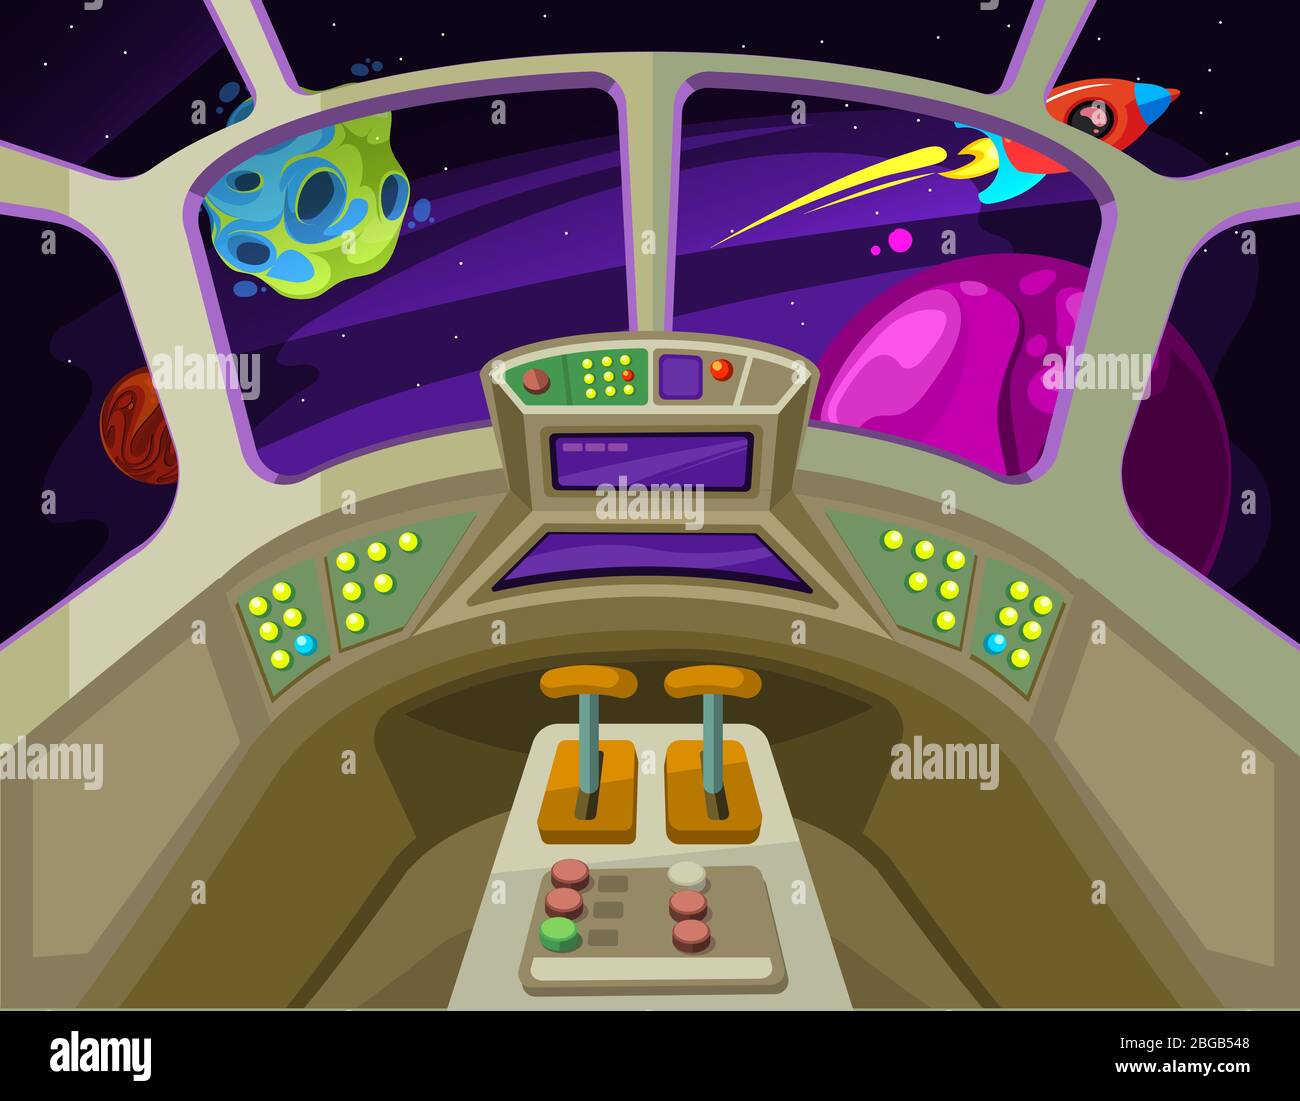 Cartoon spaceship cabin interior with windows into space with alien planets vector illustration Stock Vector